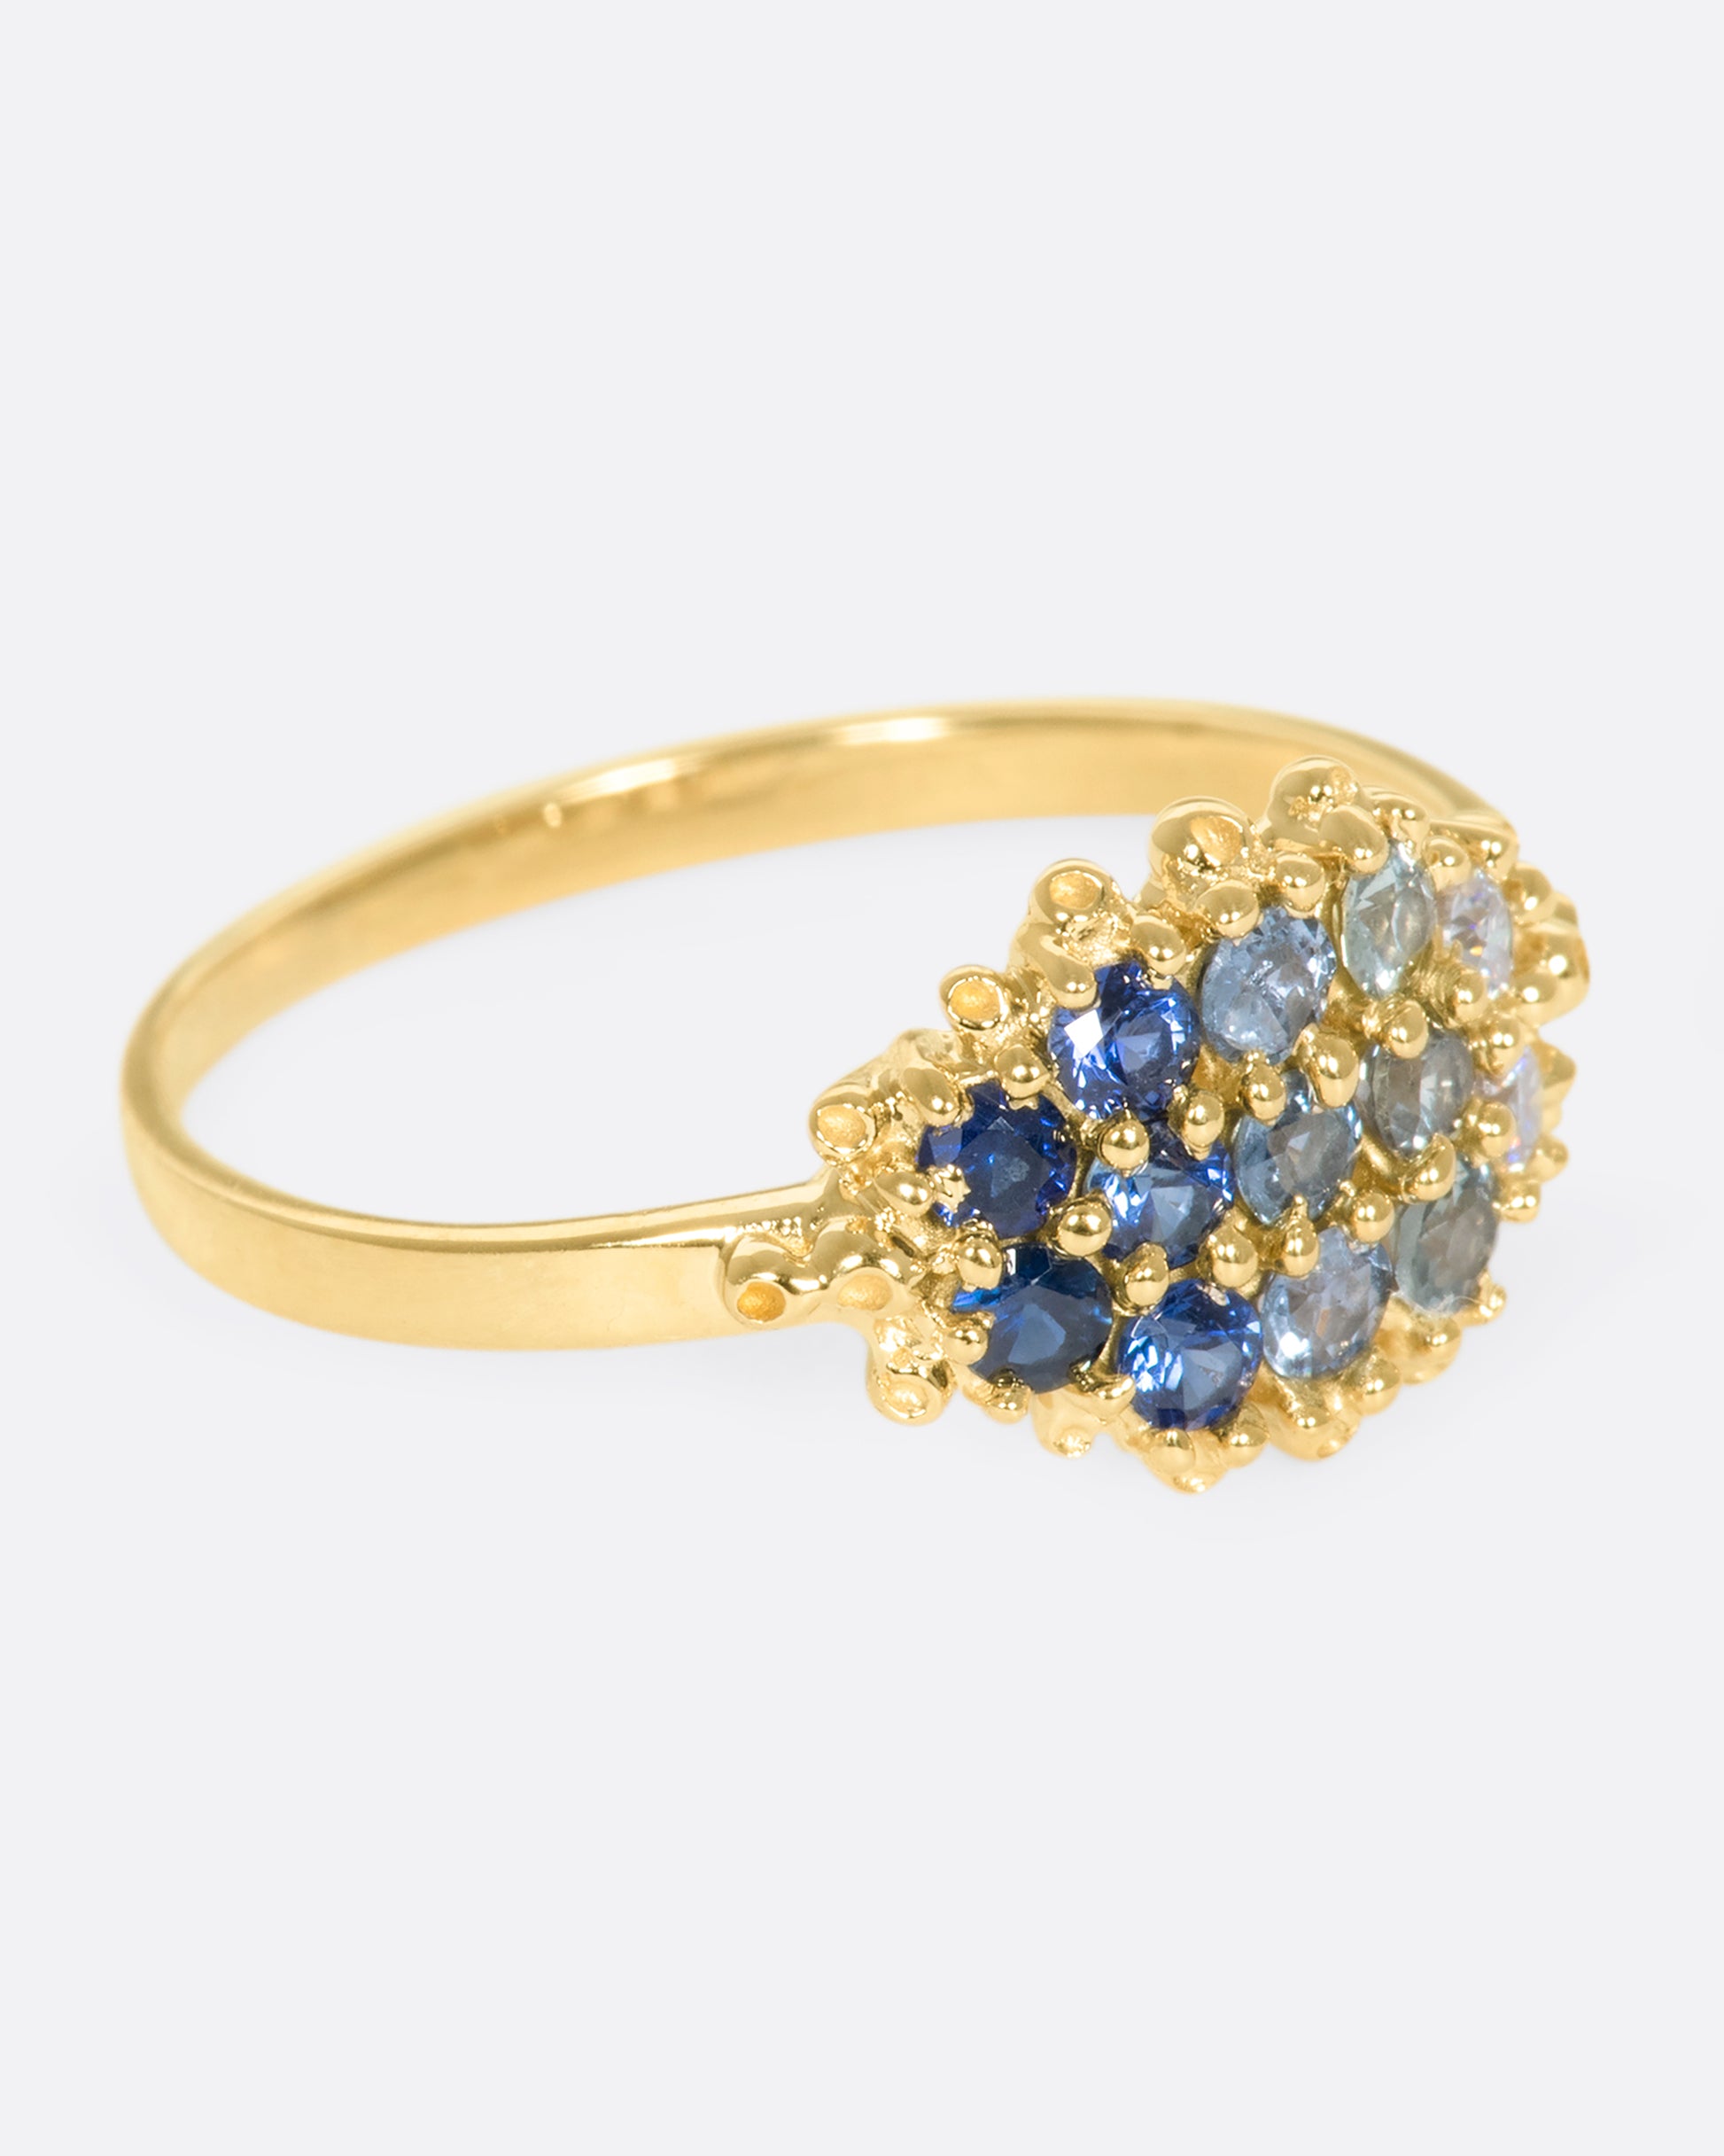 A right side view of a yellow gold ring with 12 sapphires in a range of blue shades.